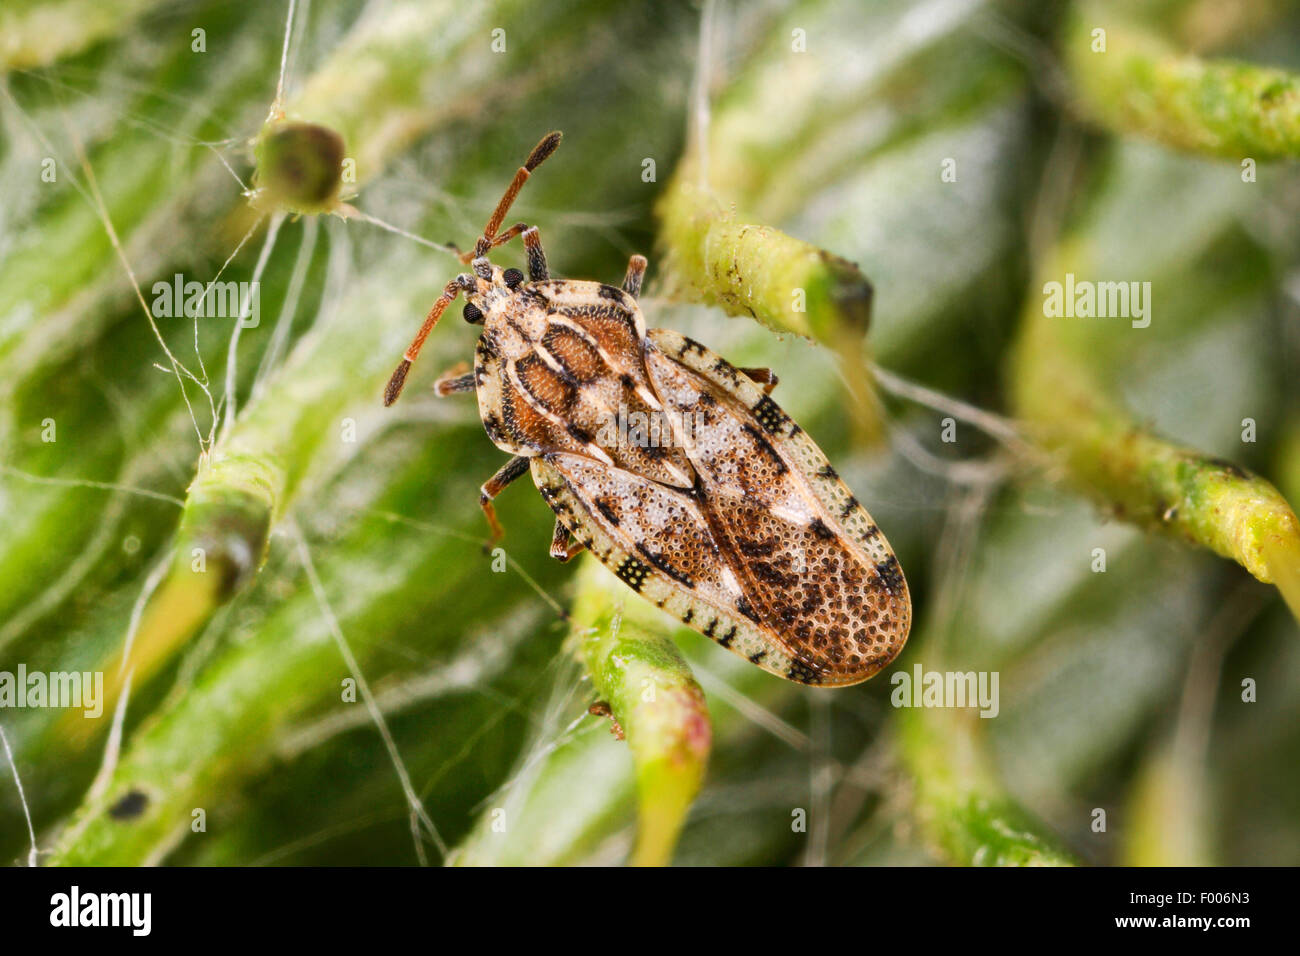 Spear thistle lacebug, Spear thistle lace bug (Tingis cardui), sitting on a plant, Germany Stock Photo